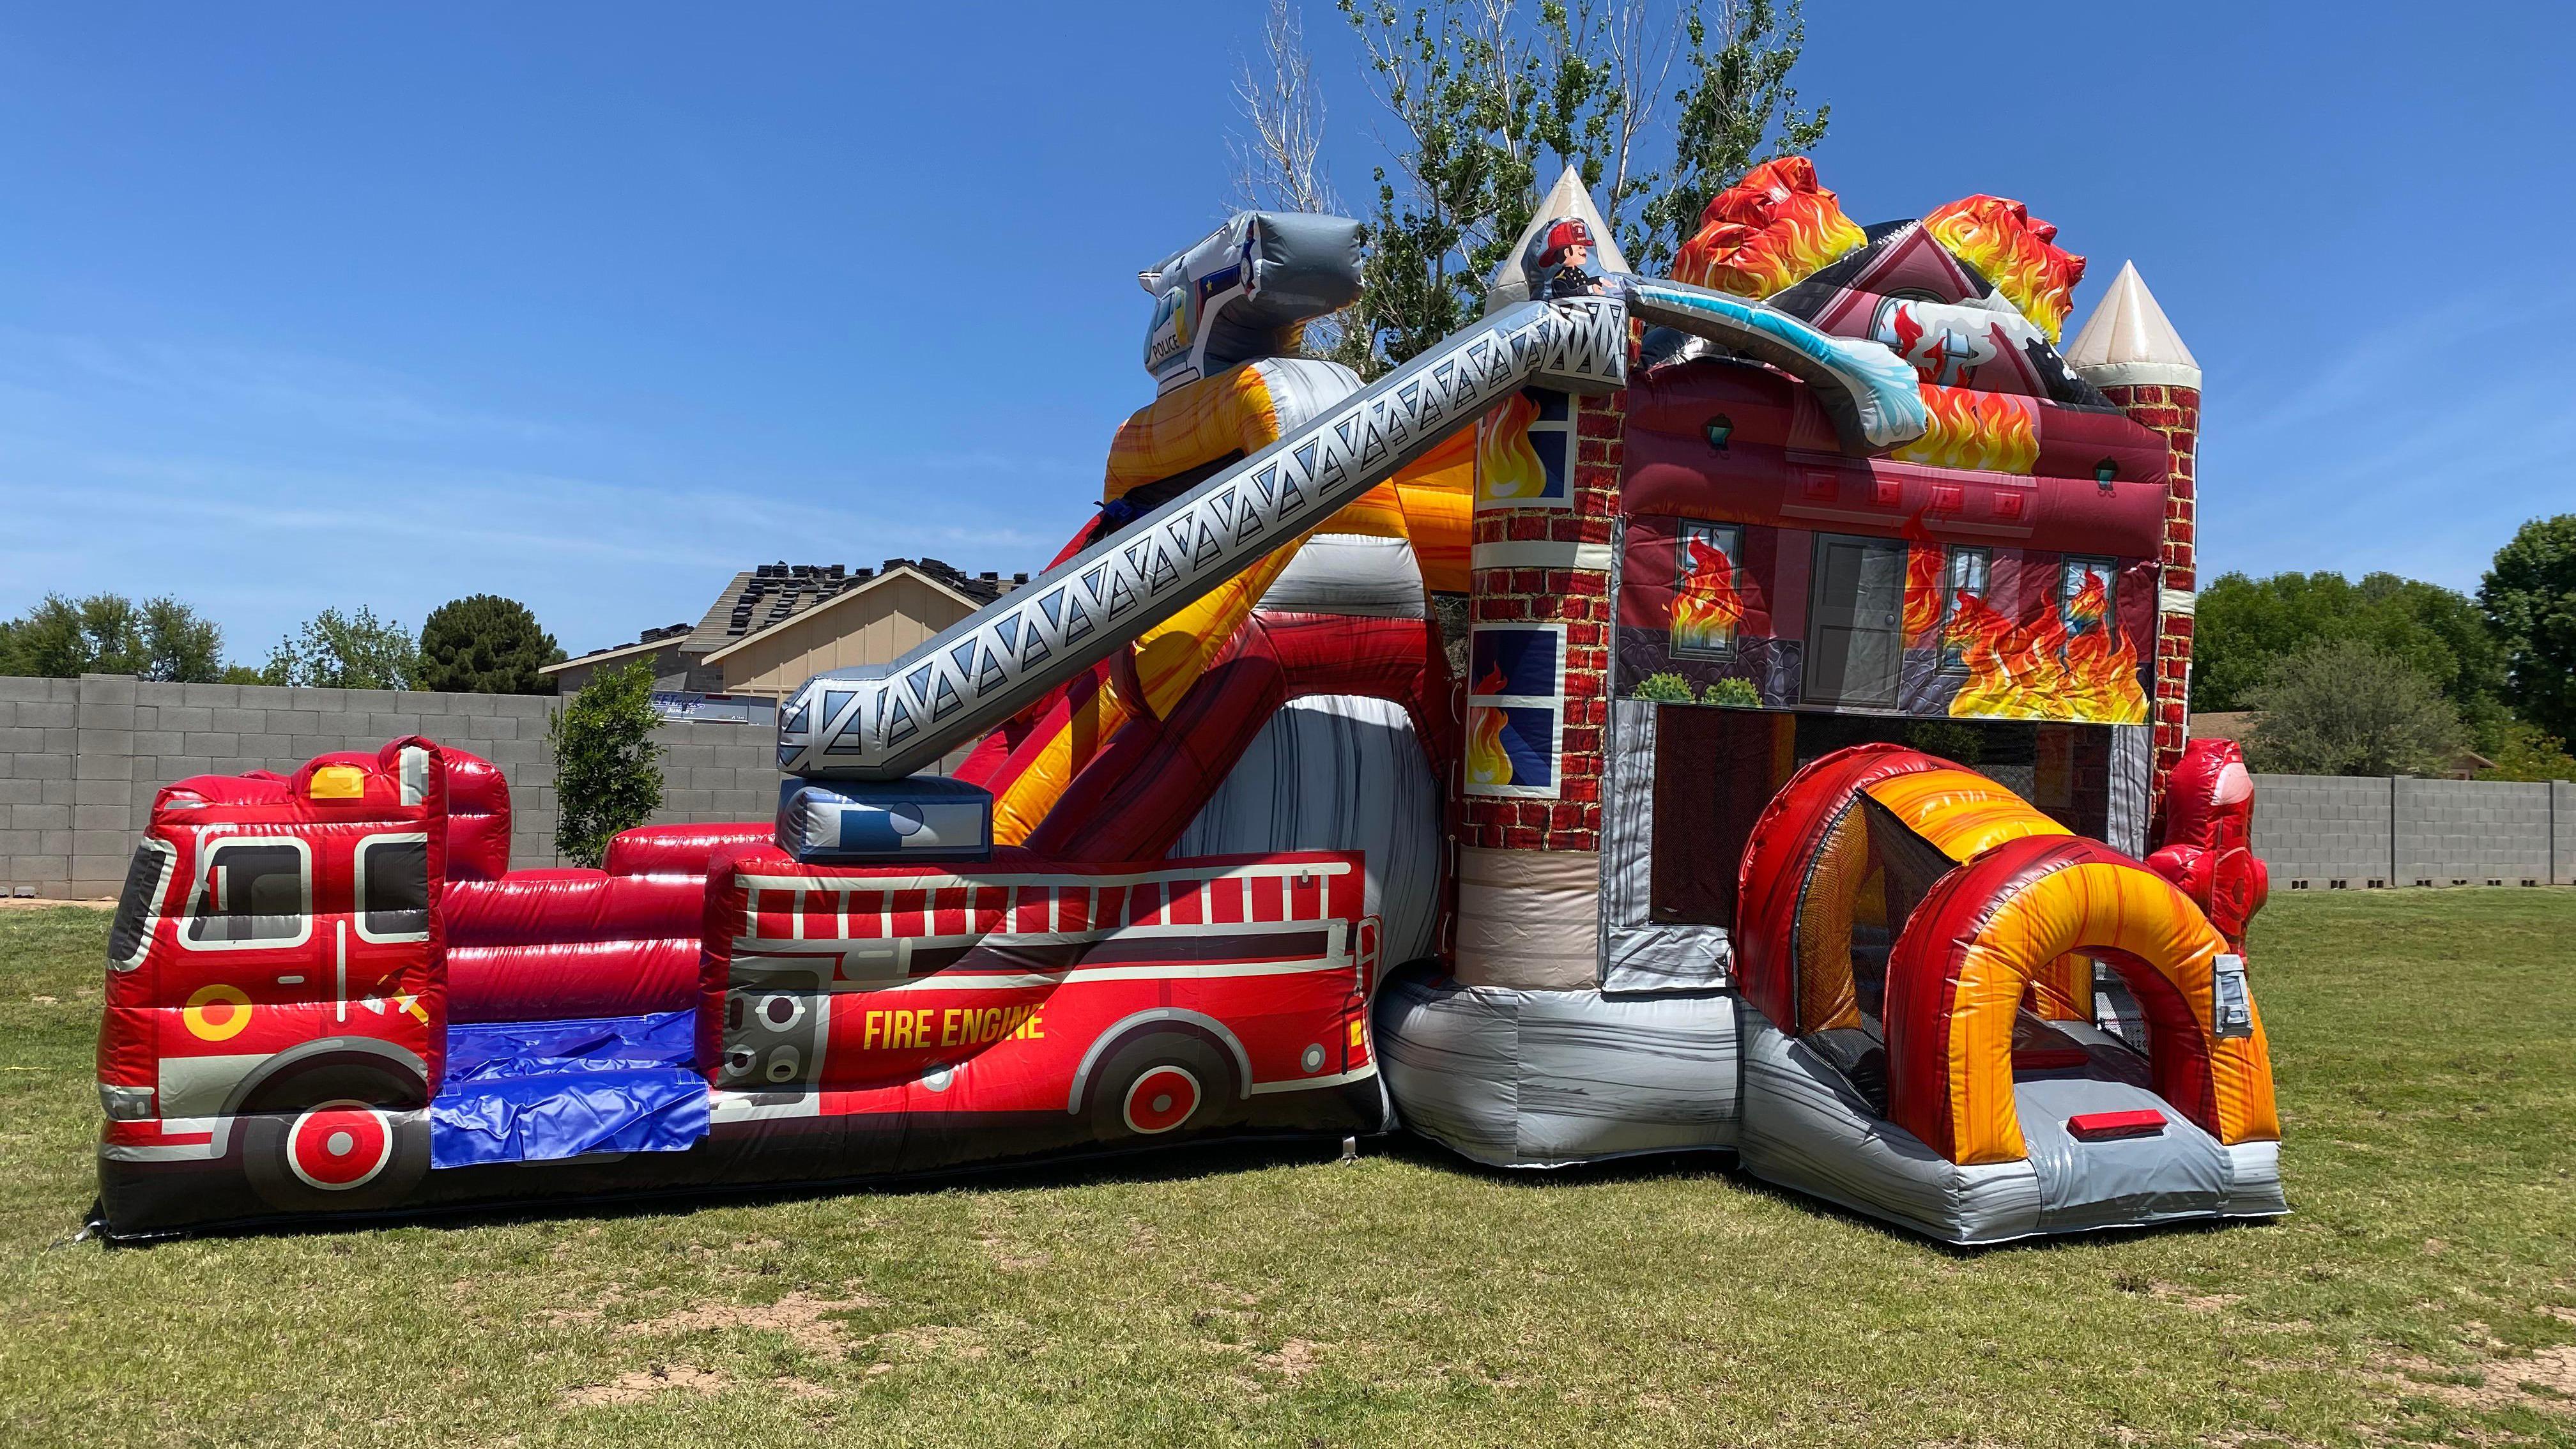 Firehouse Double Slide Bounce House Rental! This Firehouse Bounce House with an Inflatable Double Slide and Basketball hoop will make a big impression on your kiddo and guests!  The Firetruck Slide that is attached to the bounce house has a realistic-looking latter with firefighters hosing down the burning building! Start by climbing through the tunnel to a large bouncing and jumping area with a basketball hoop attached.  Once you are done jumping you can climb up the slide and slide to the bottom.  With a 3d fire hydrant and bright-colored digital printing, this is the best Firetruck bounce house available.   This inflatable rental is a showstopper for birthday parties all the way to large-scale events.